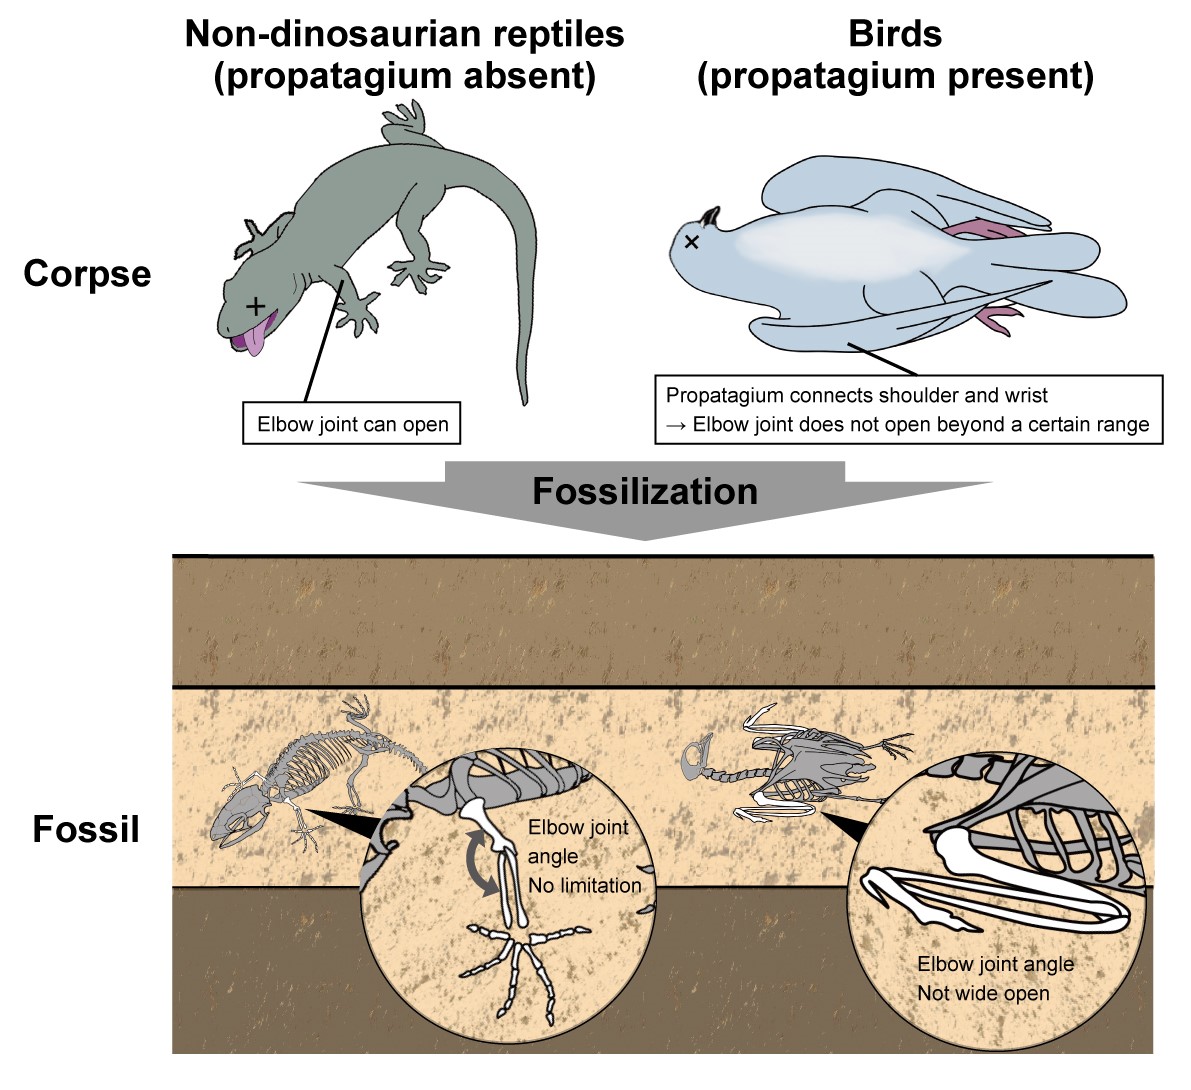 An illustration of a lizard and a bird on top of fossil versions of those animals